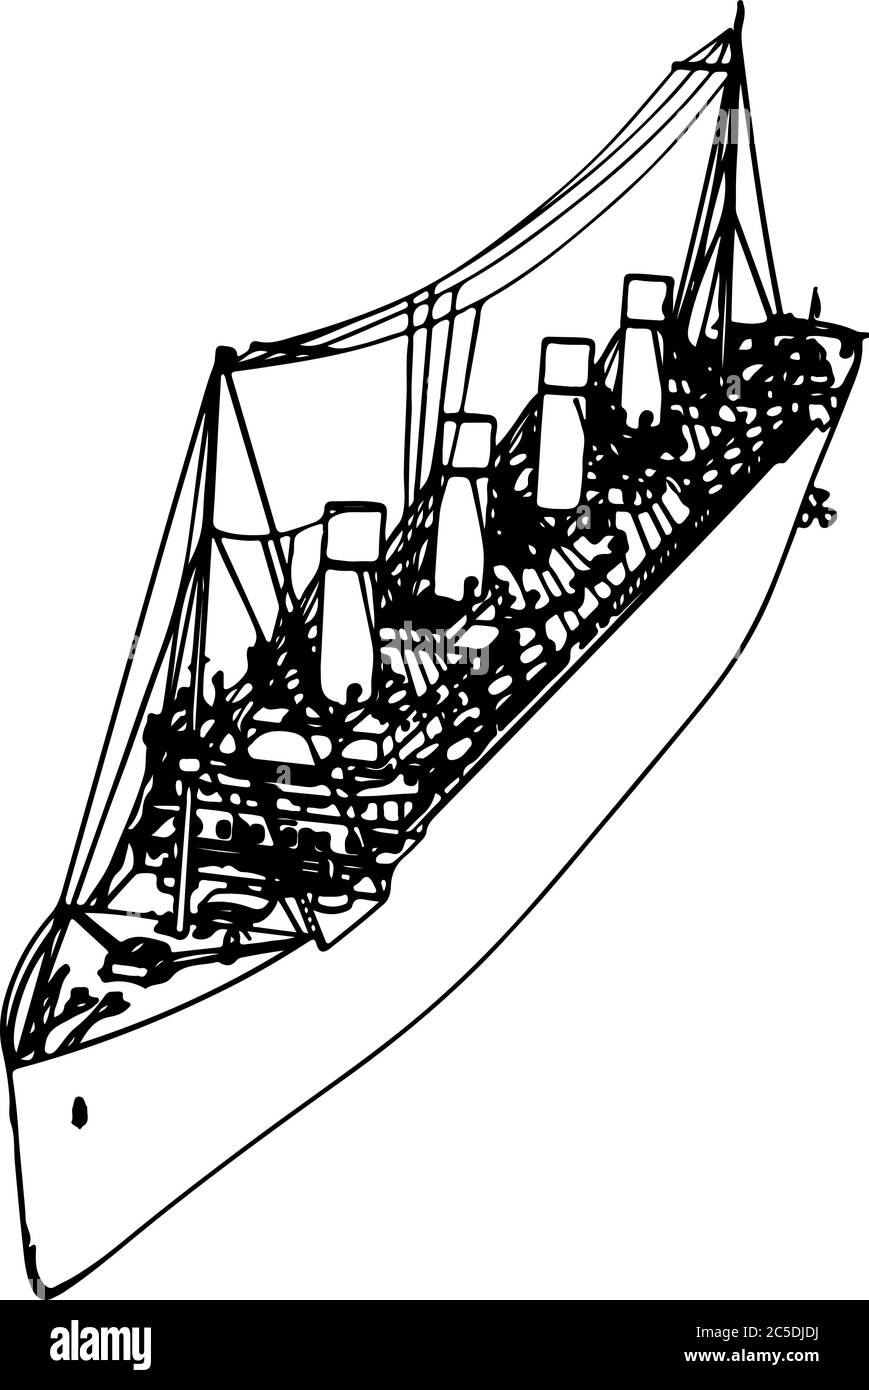 Titanic Drawing - How To Draw The Titanic Step By Step